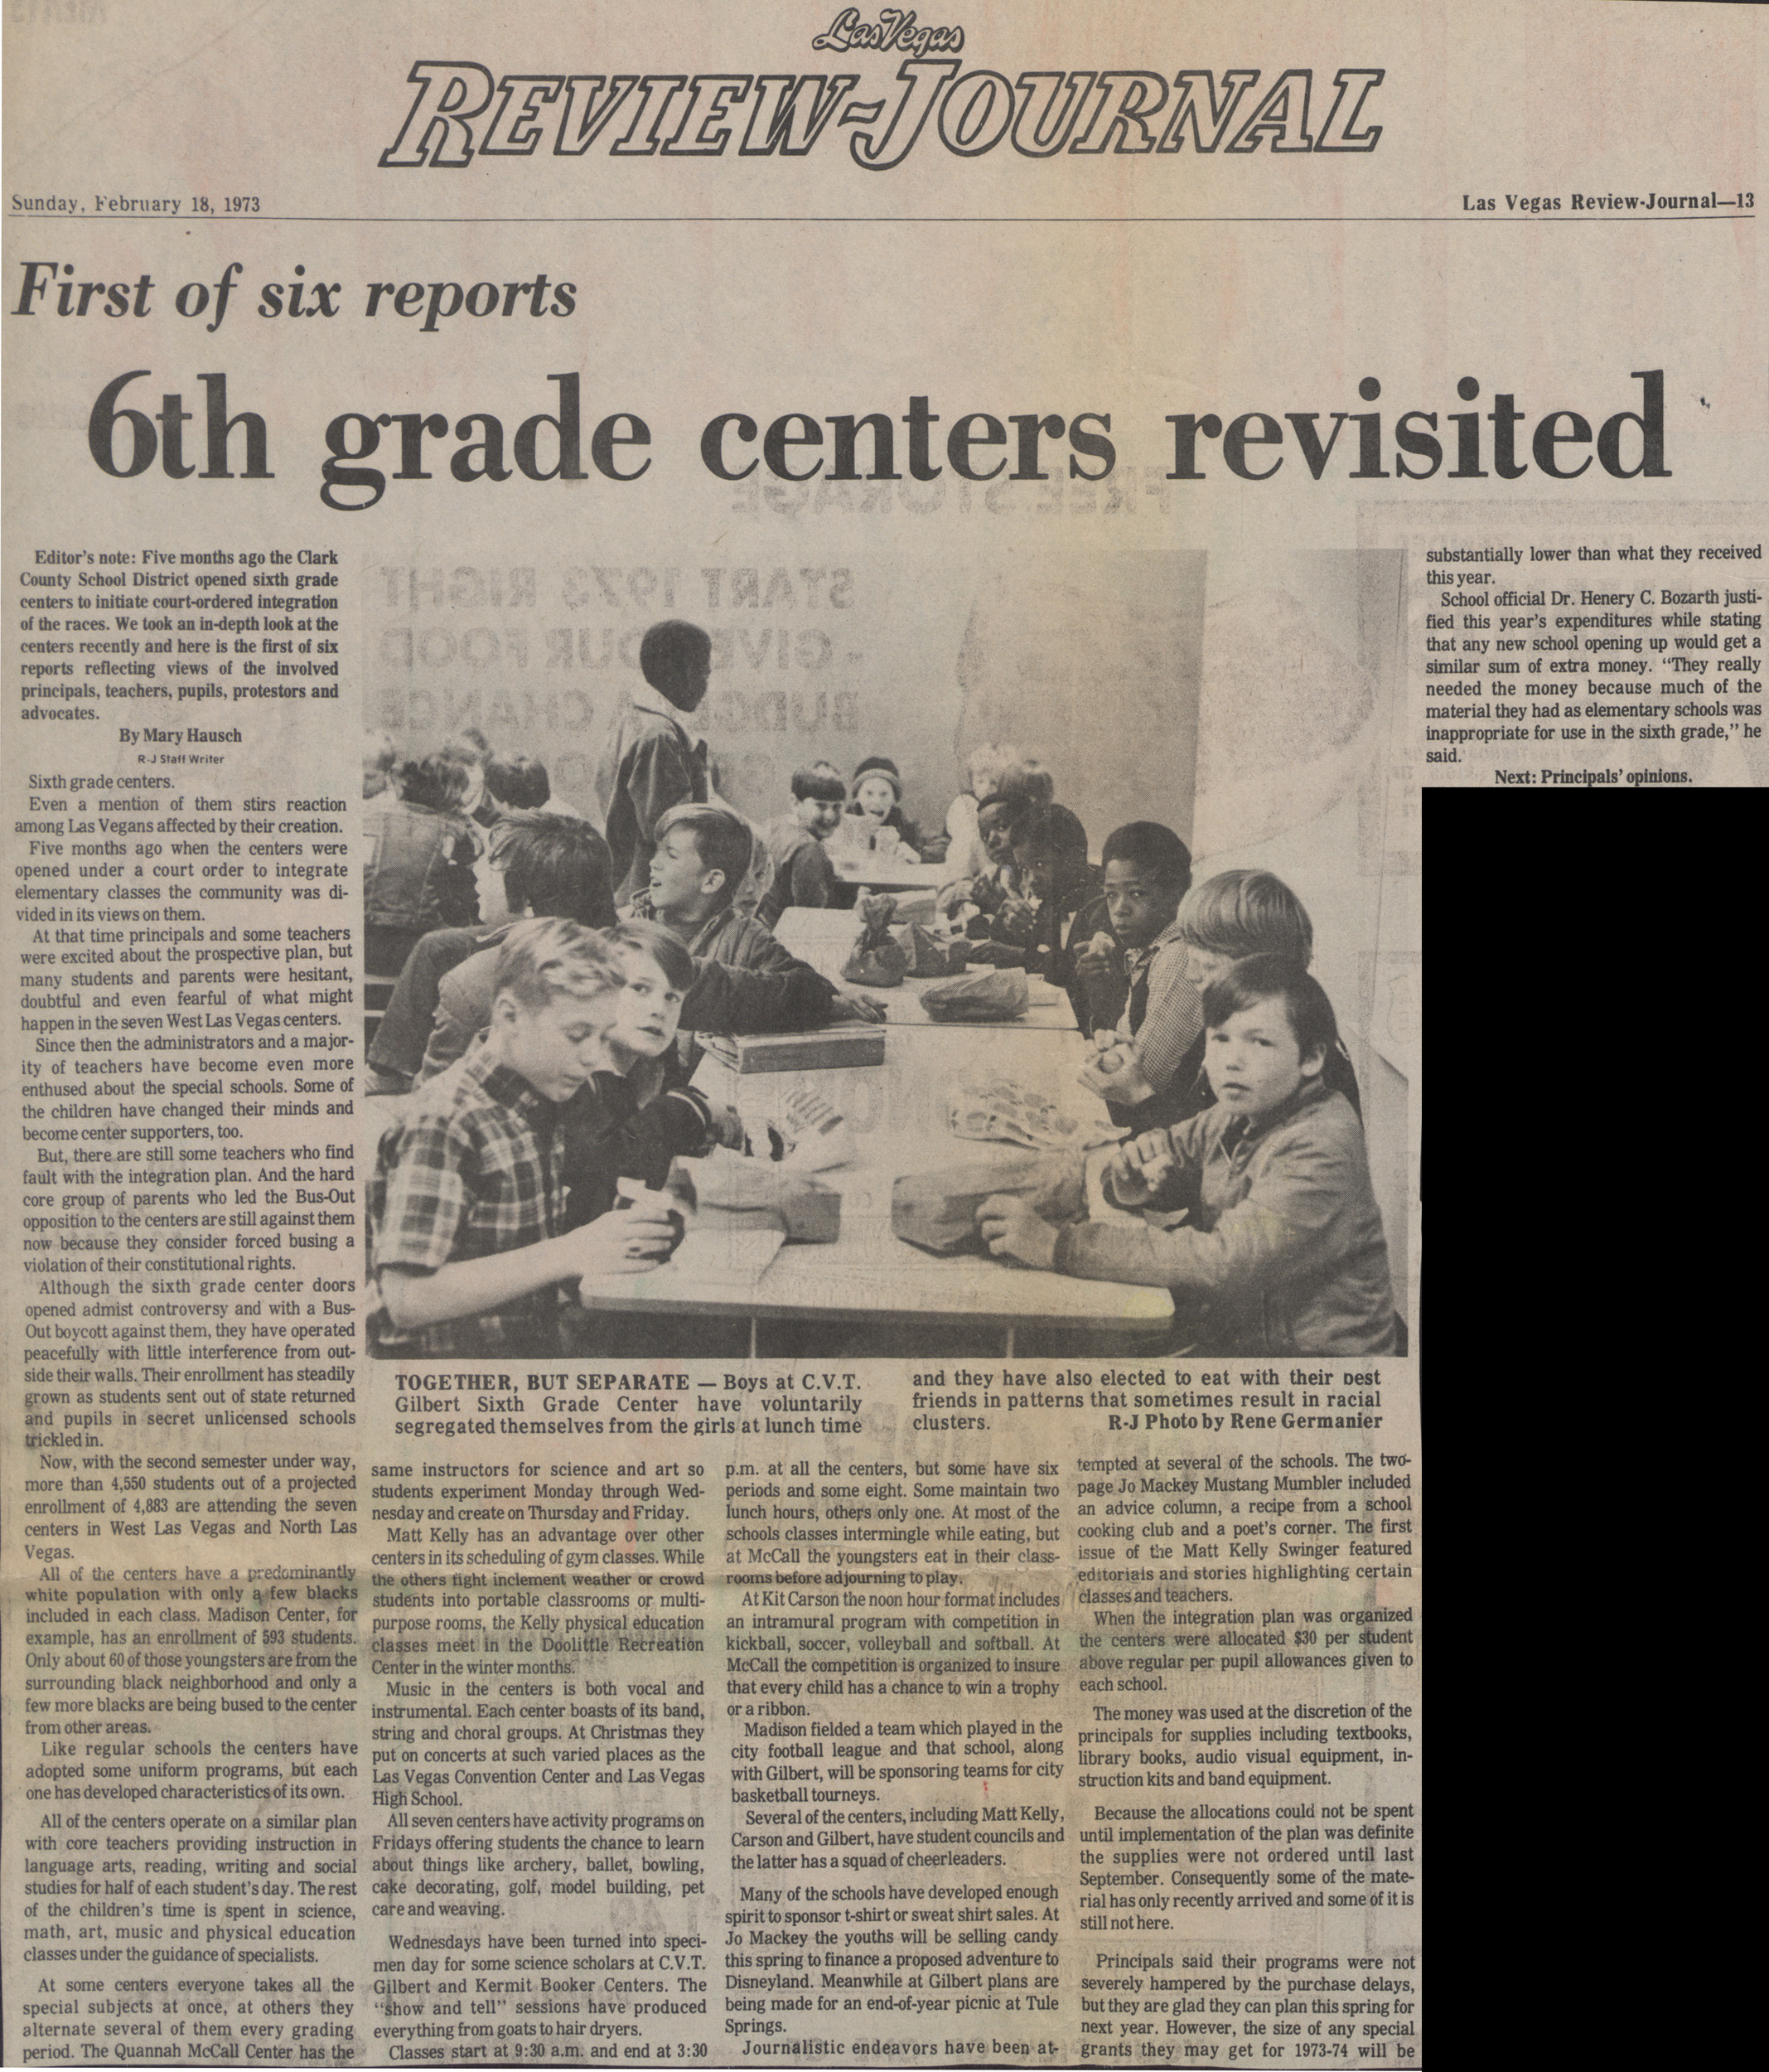 Newspaper clipping, First of six reports, 6th grade centers revisited, Las Vegas Review-Journal, February 18, 1973